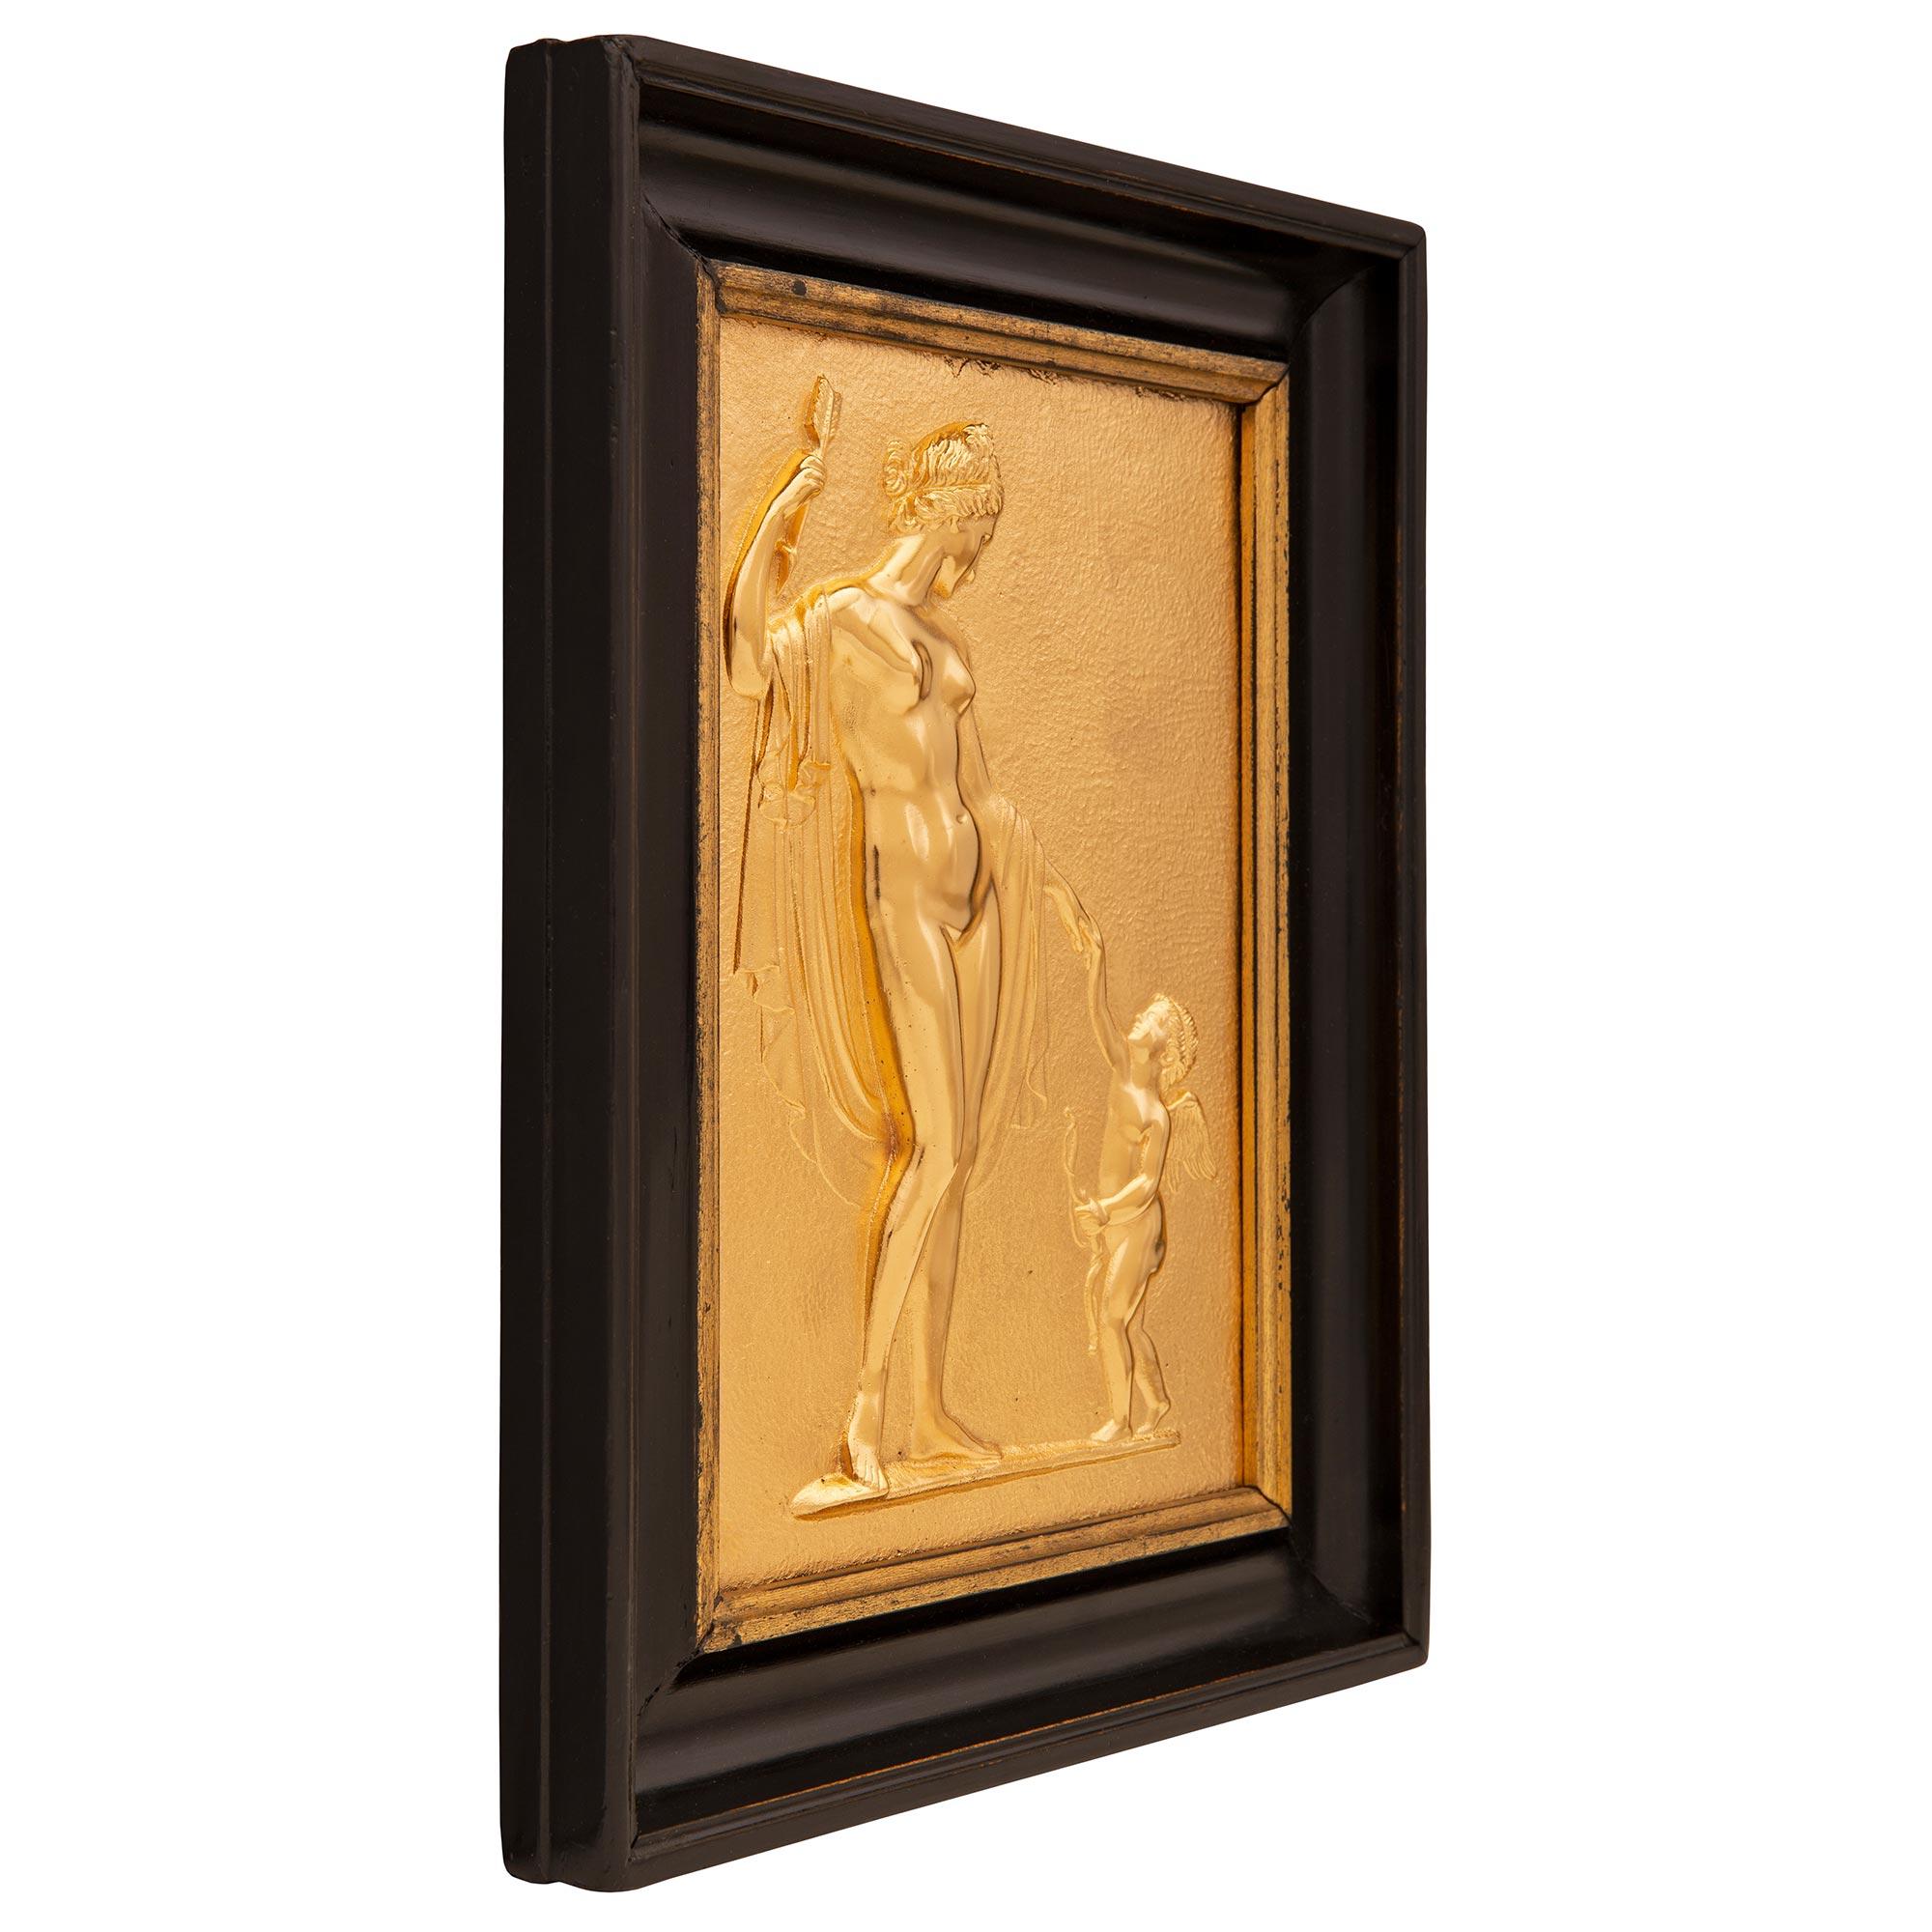 A beautiful and most decorative pair of French 19th century Neo-Classical st. ormolu and Ebony decorative wall plaques. Each wall decor retains its original rectangular mottled Ebony frame with the superb richly chased fitted ormolu plaques at the